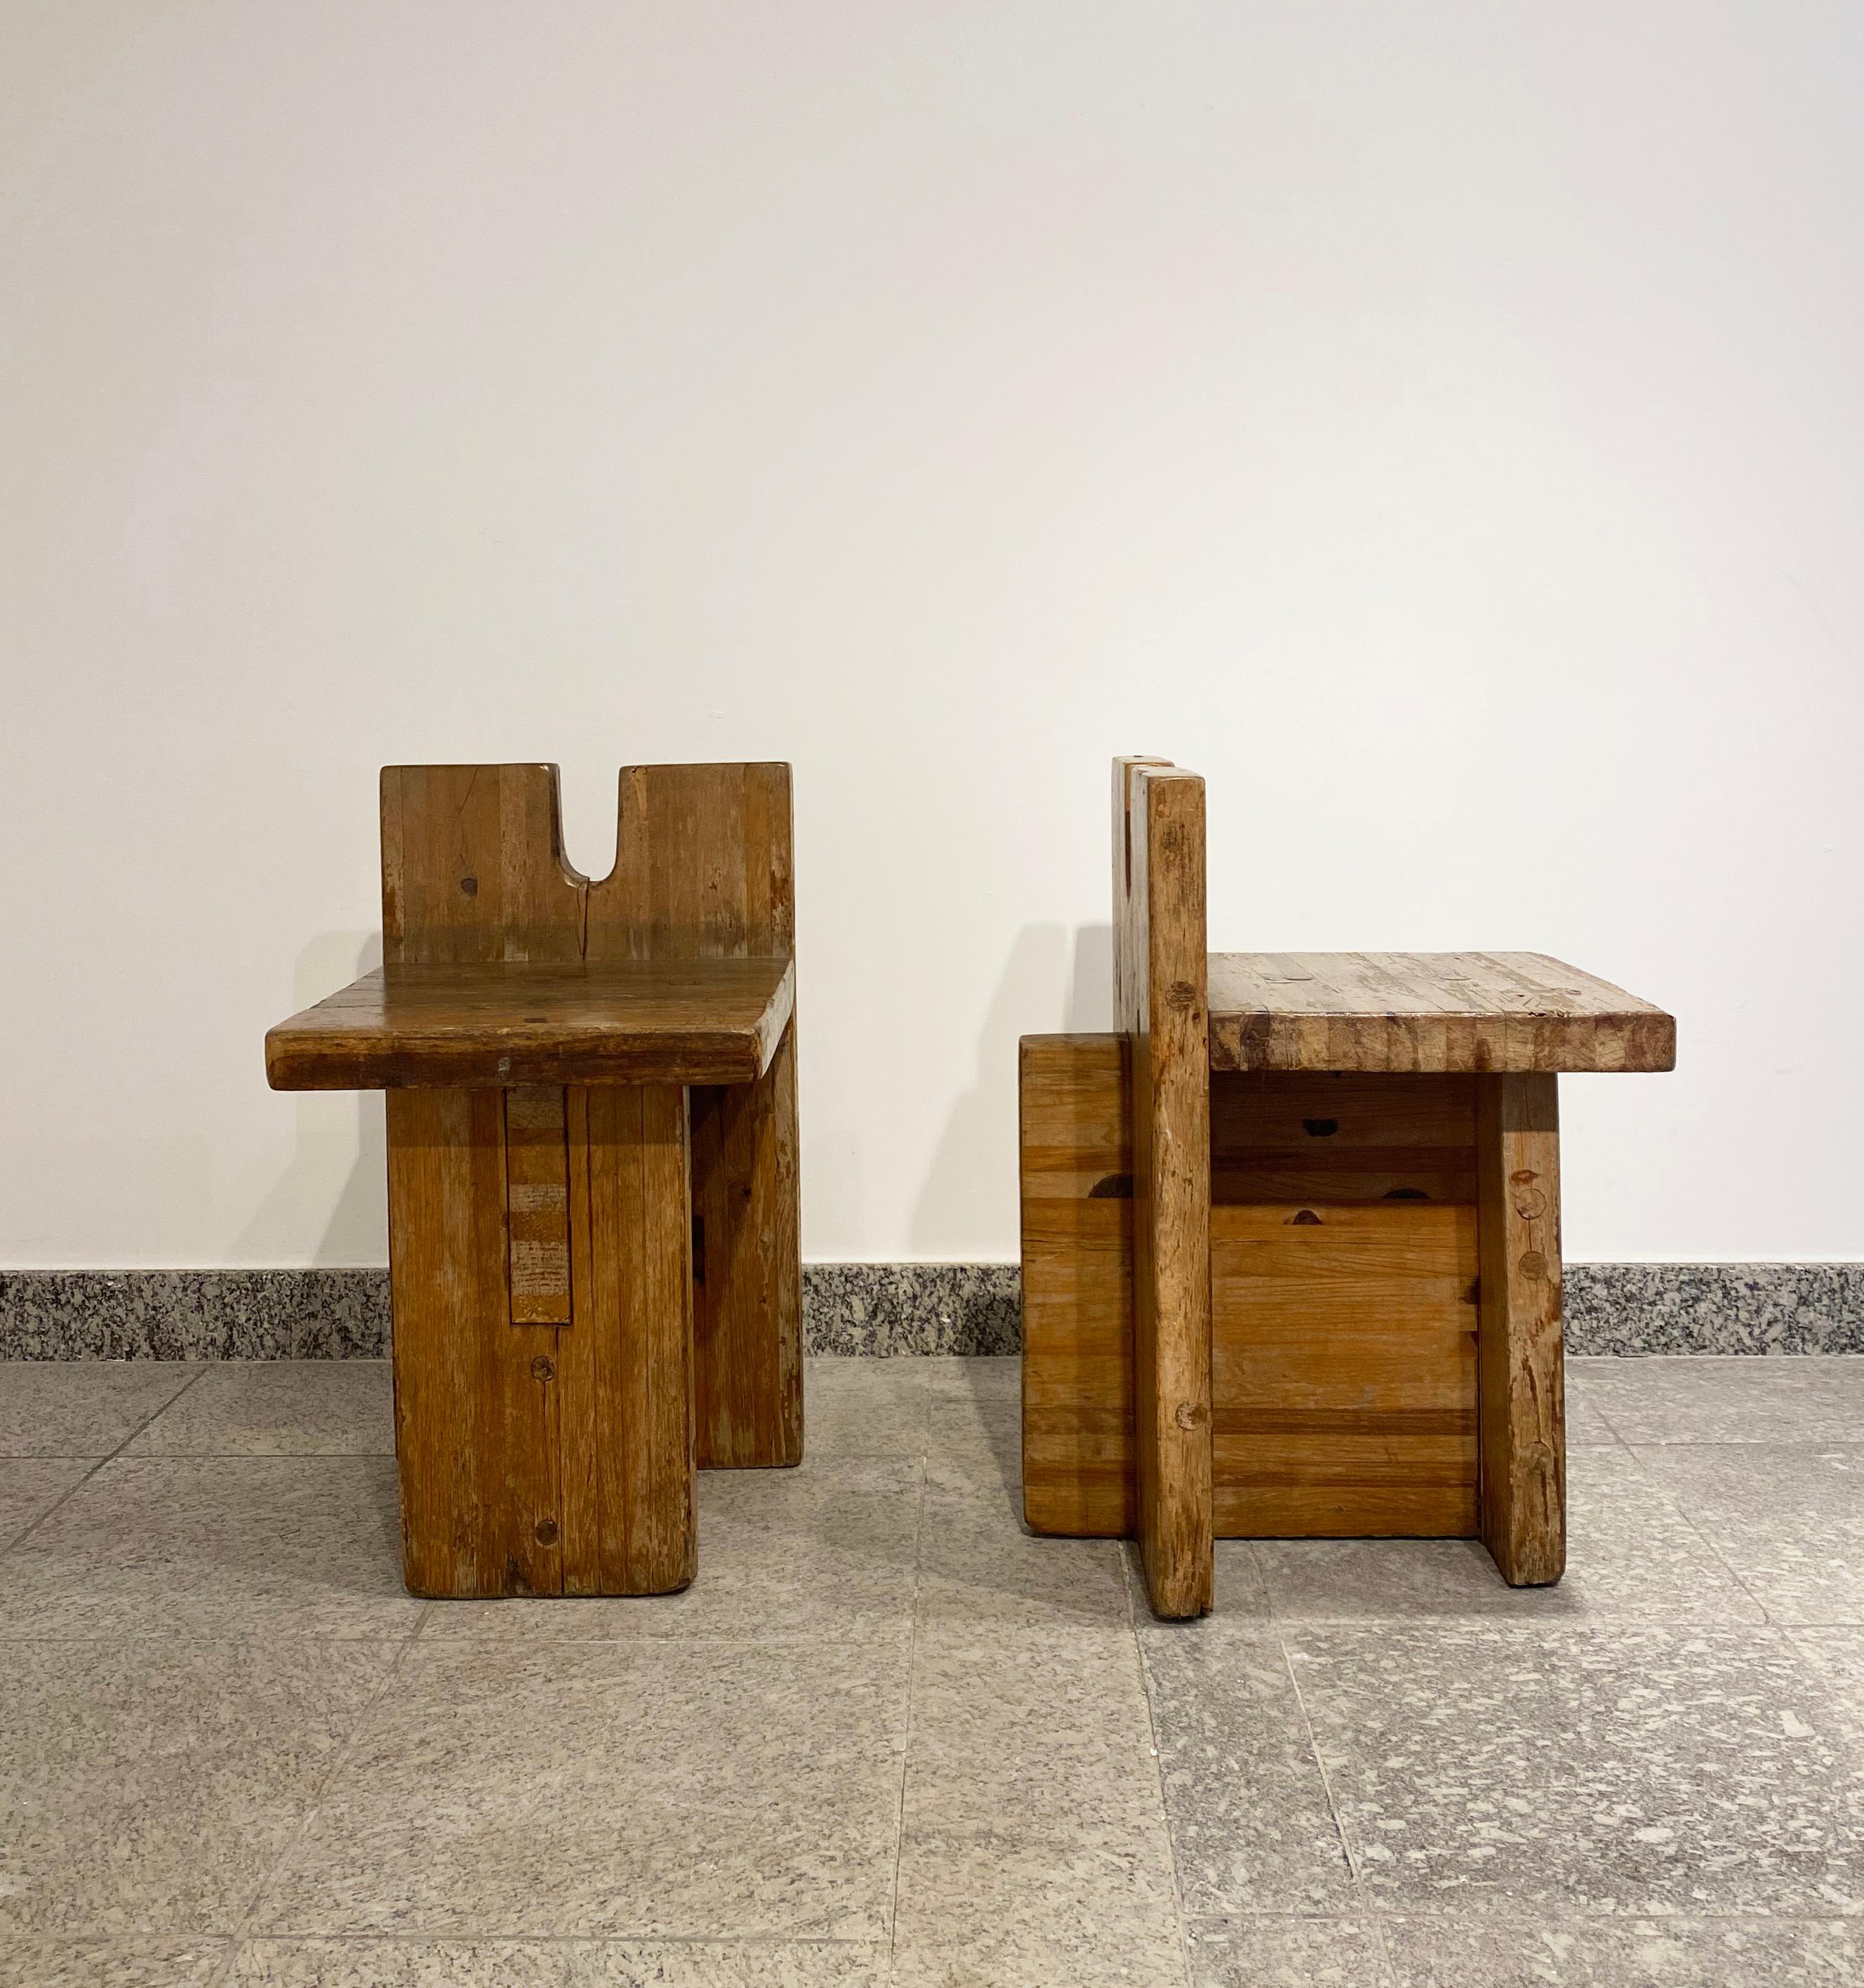 Designed by Lina Bo Bardi, Marcelo Ferraz and Marcelo Suzuki
Created for the center SESC Pompéia in São Paulo
Brasil, 1980s
Pine wood
Price per piece, pair available

Measurements
 38 cm x 52 cm x 68,5 H cm
21,25 in x 15,74 in x 25,9 H in.